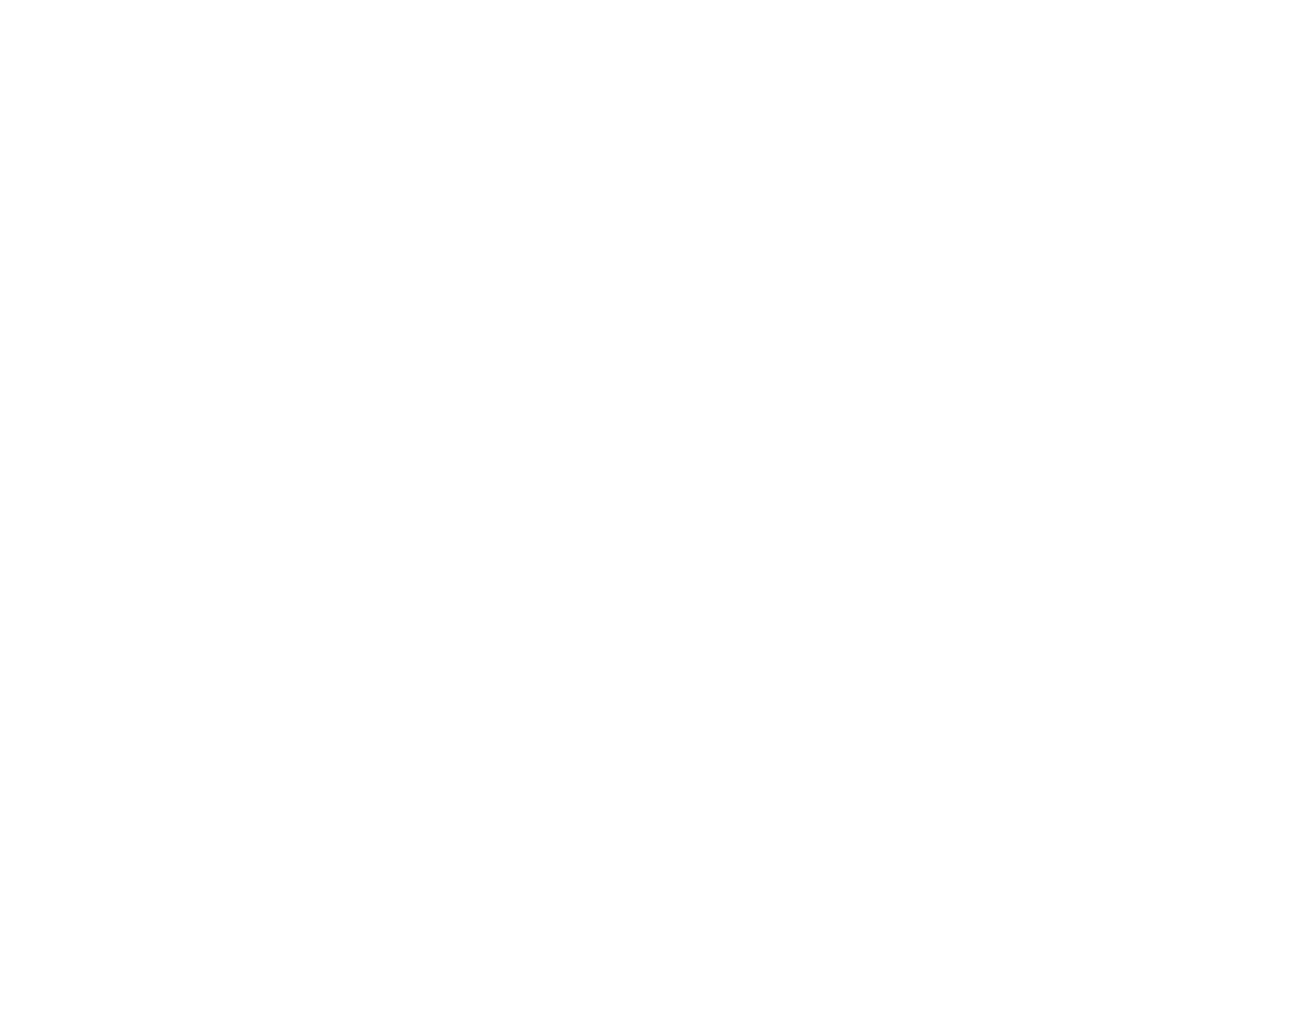 Fruit and vegetable scraps are placed in the worm hotels, installed in each garden bed. The school hopes to increase ...